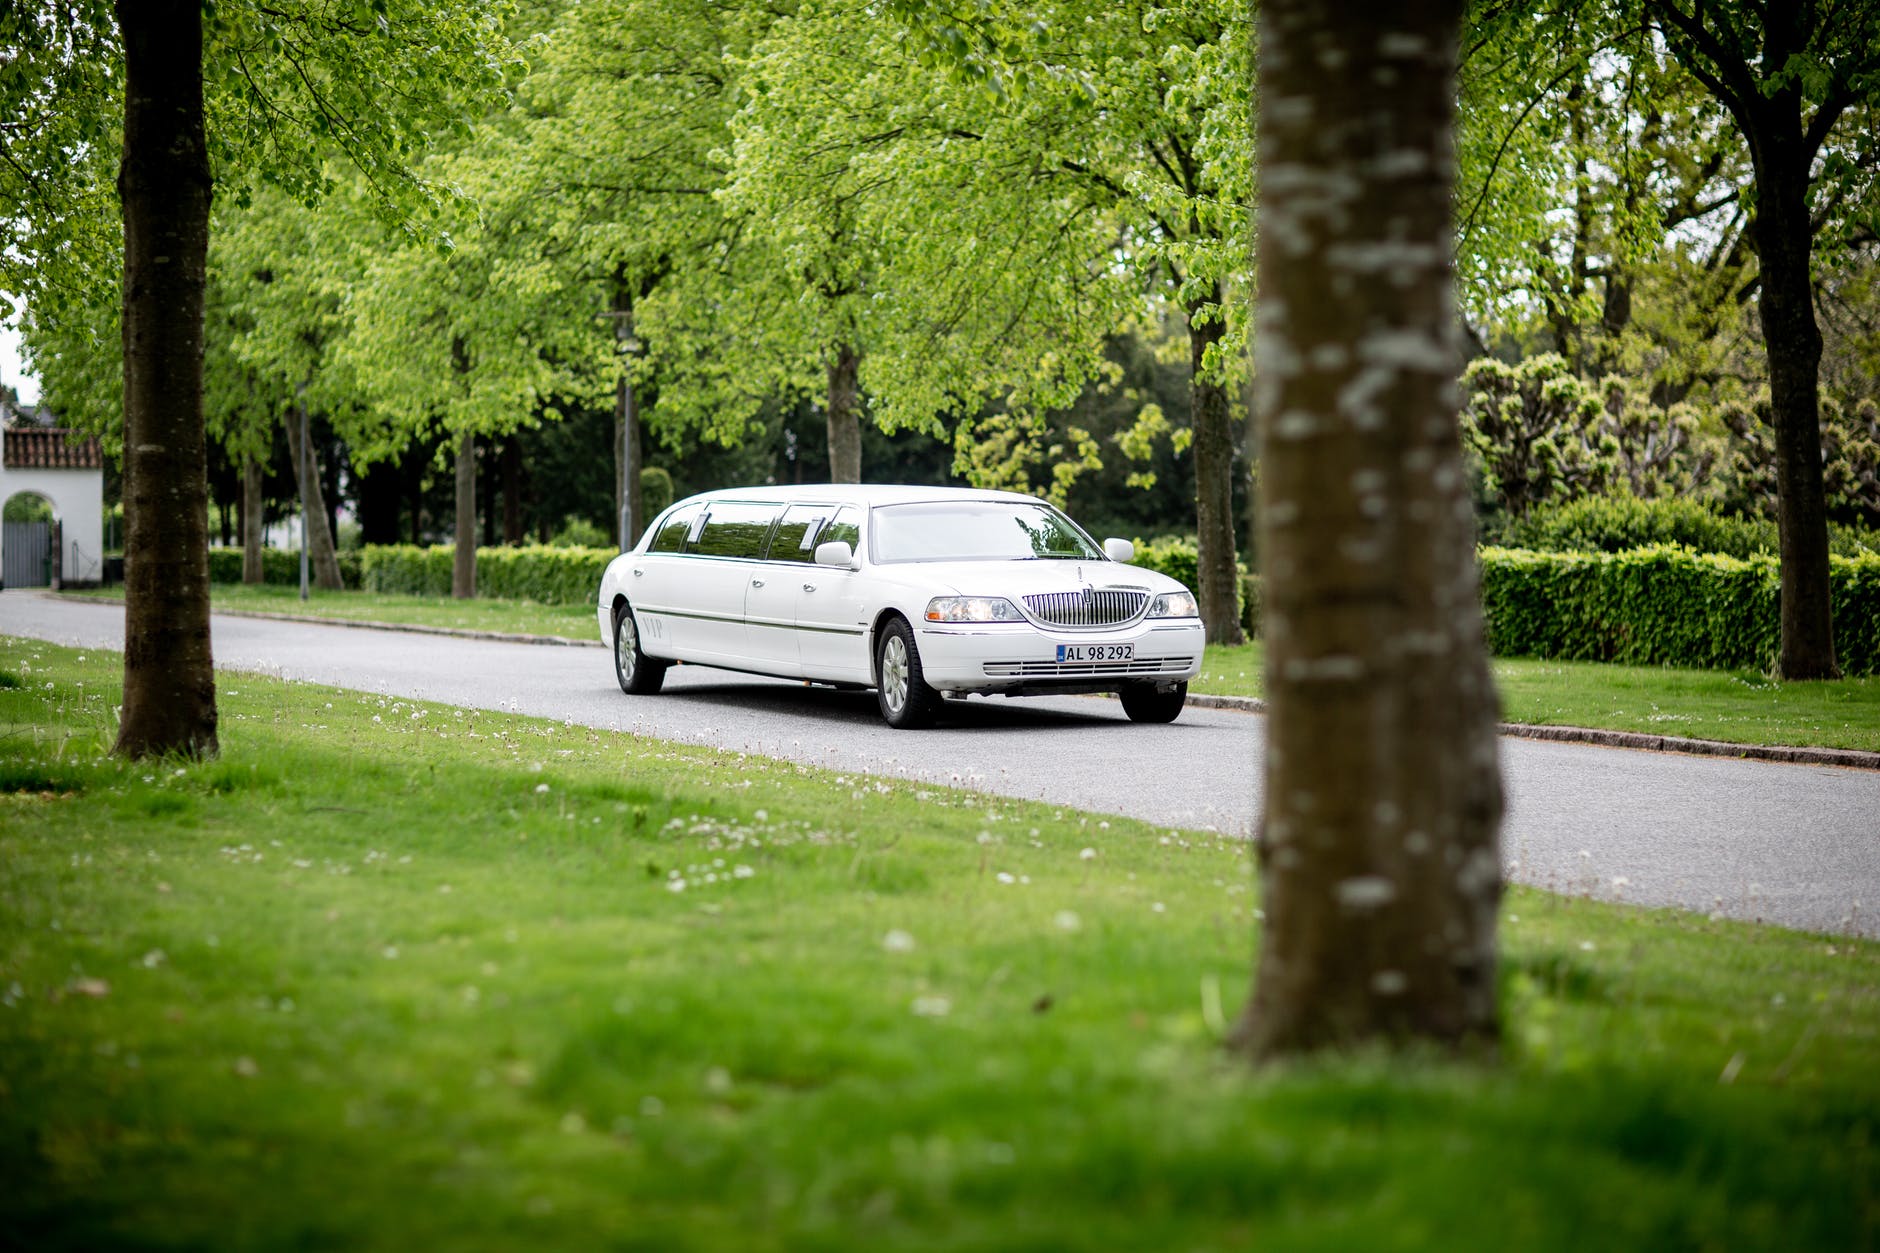 7 Reasons To Arrive At A Meeting With A Business Limousine